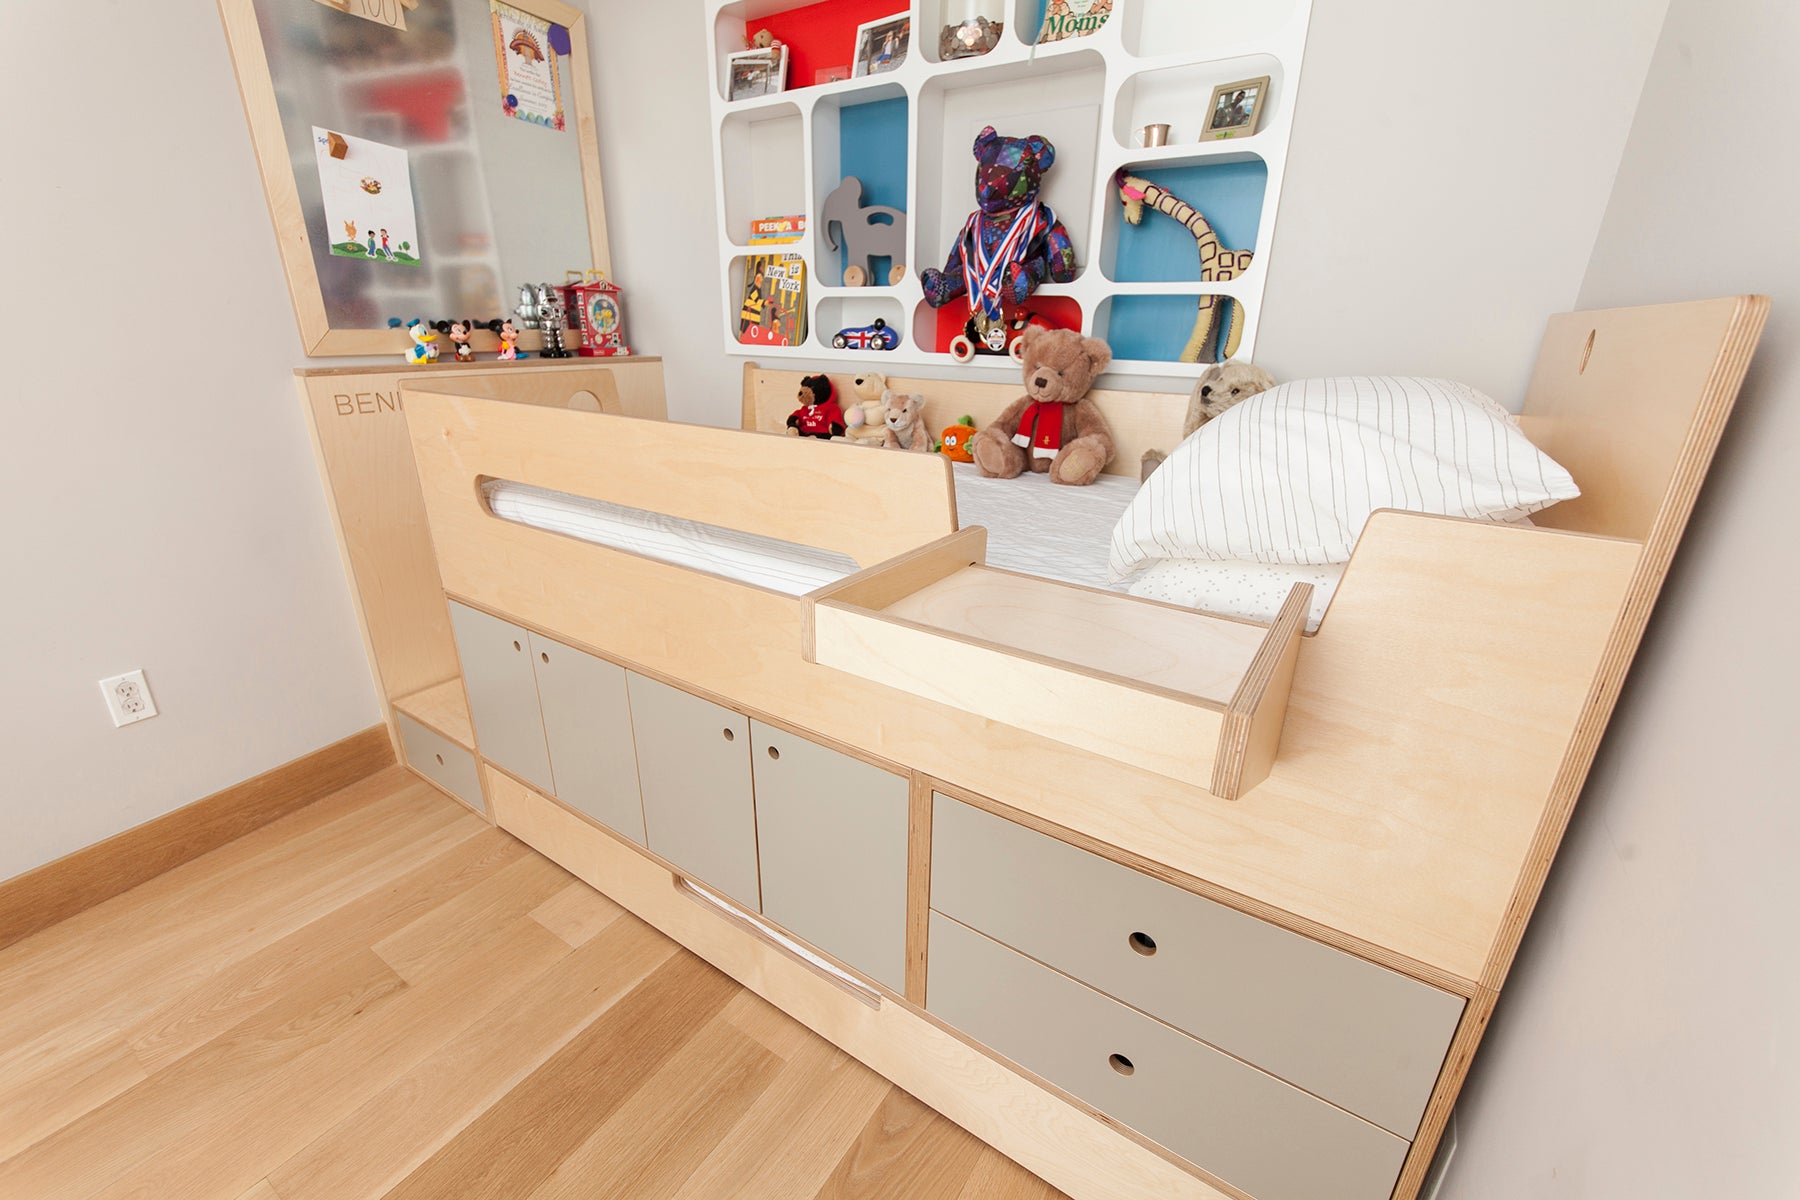 Wooden bed with storage and toys in a child’s room.